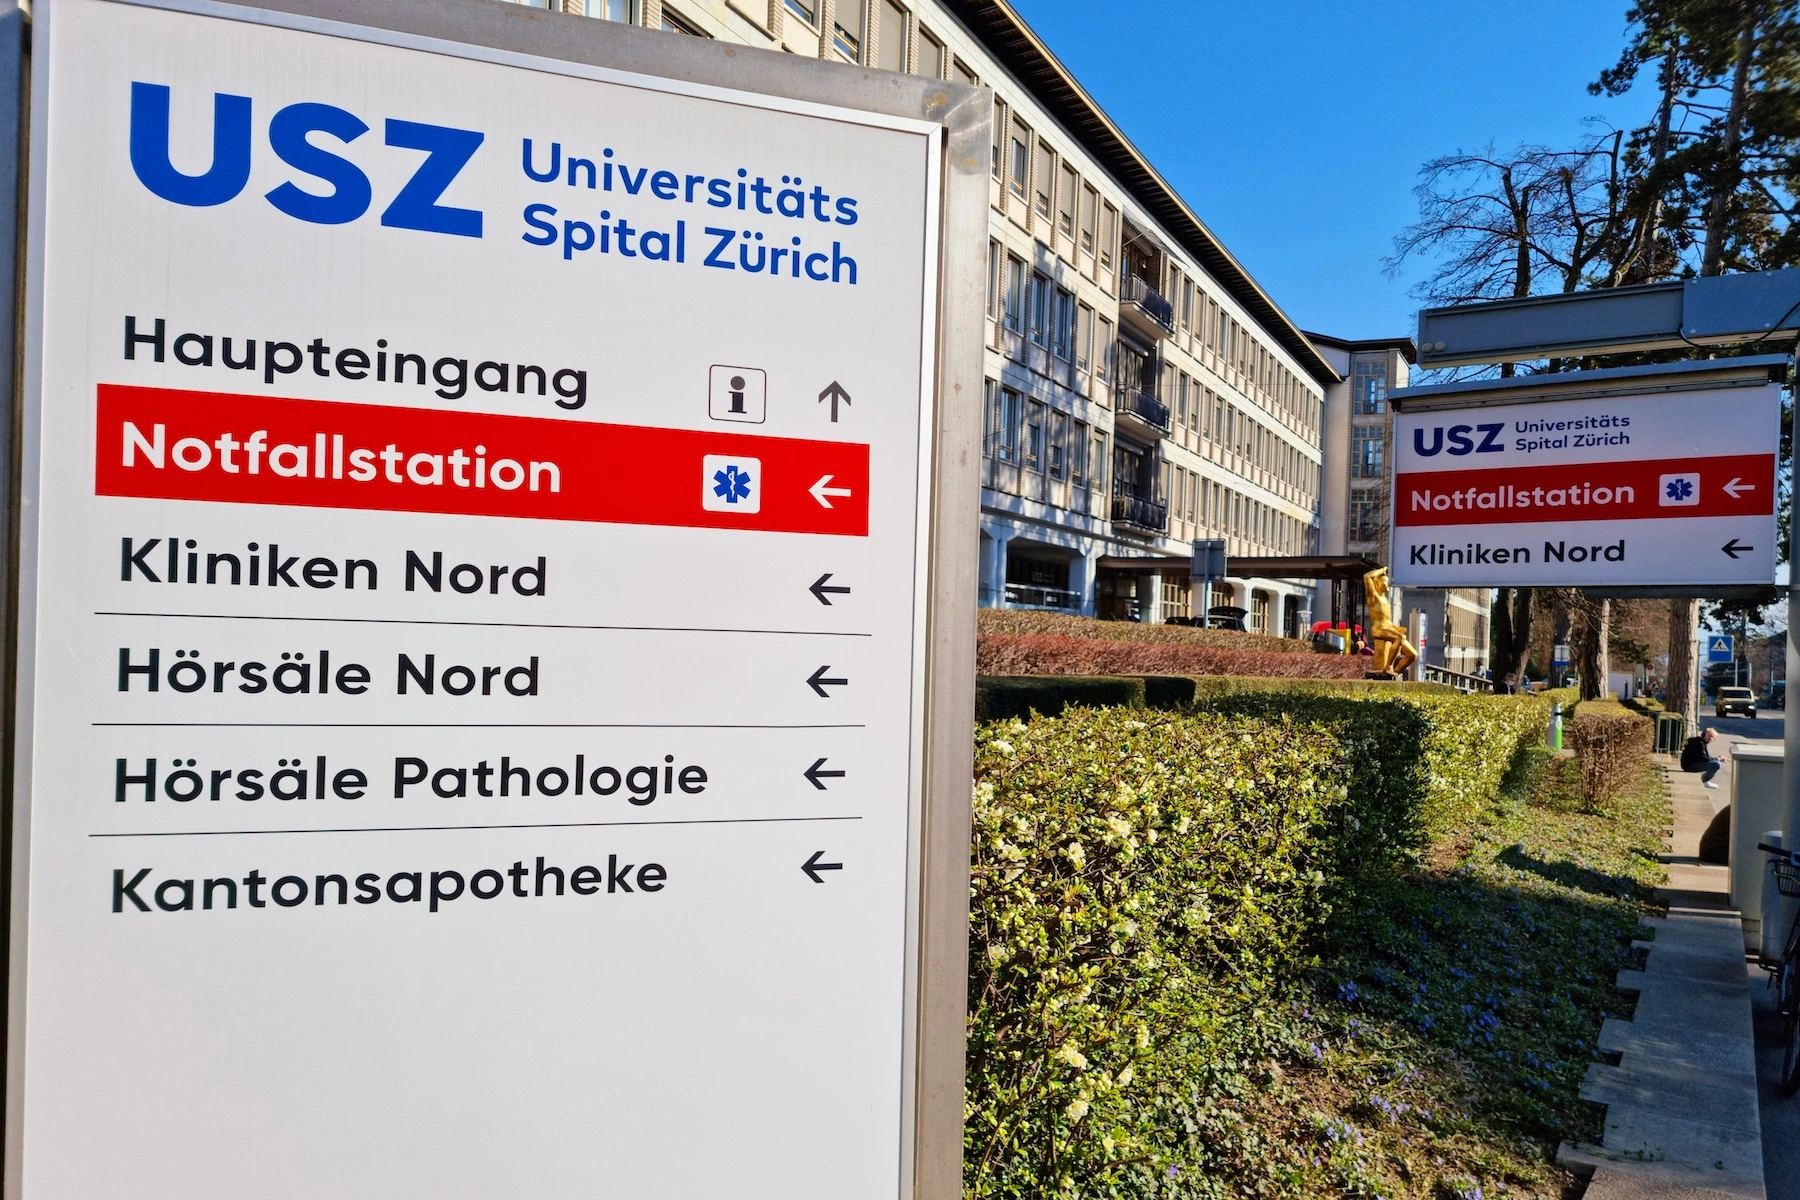 The University Hospital of Zurich displays a sign outside showing the way to the entrance, emergency drop-off, and various departments.